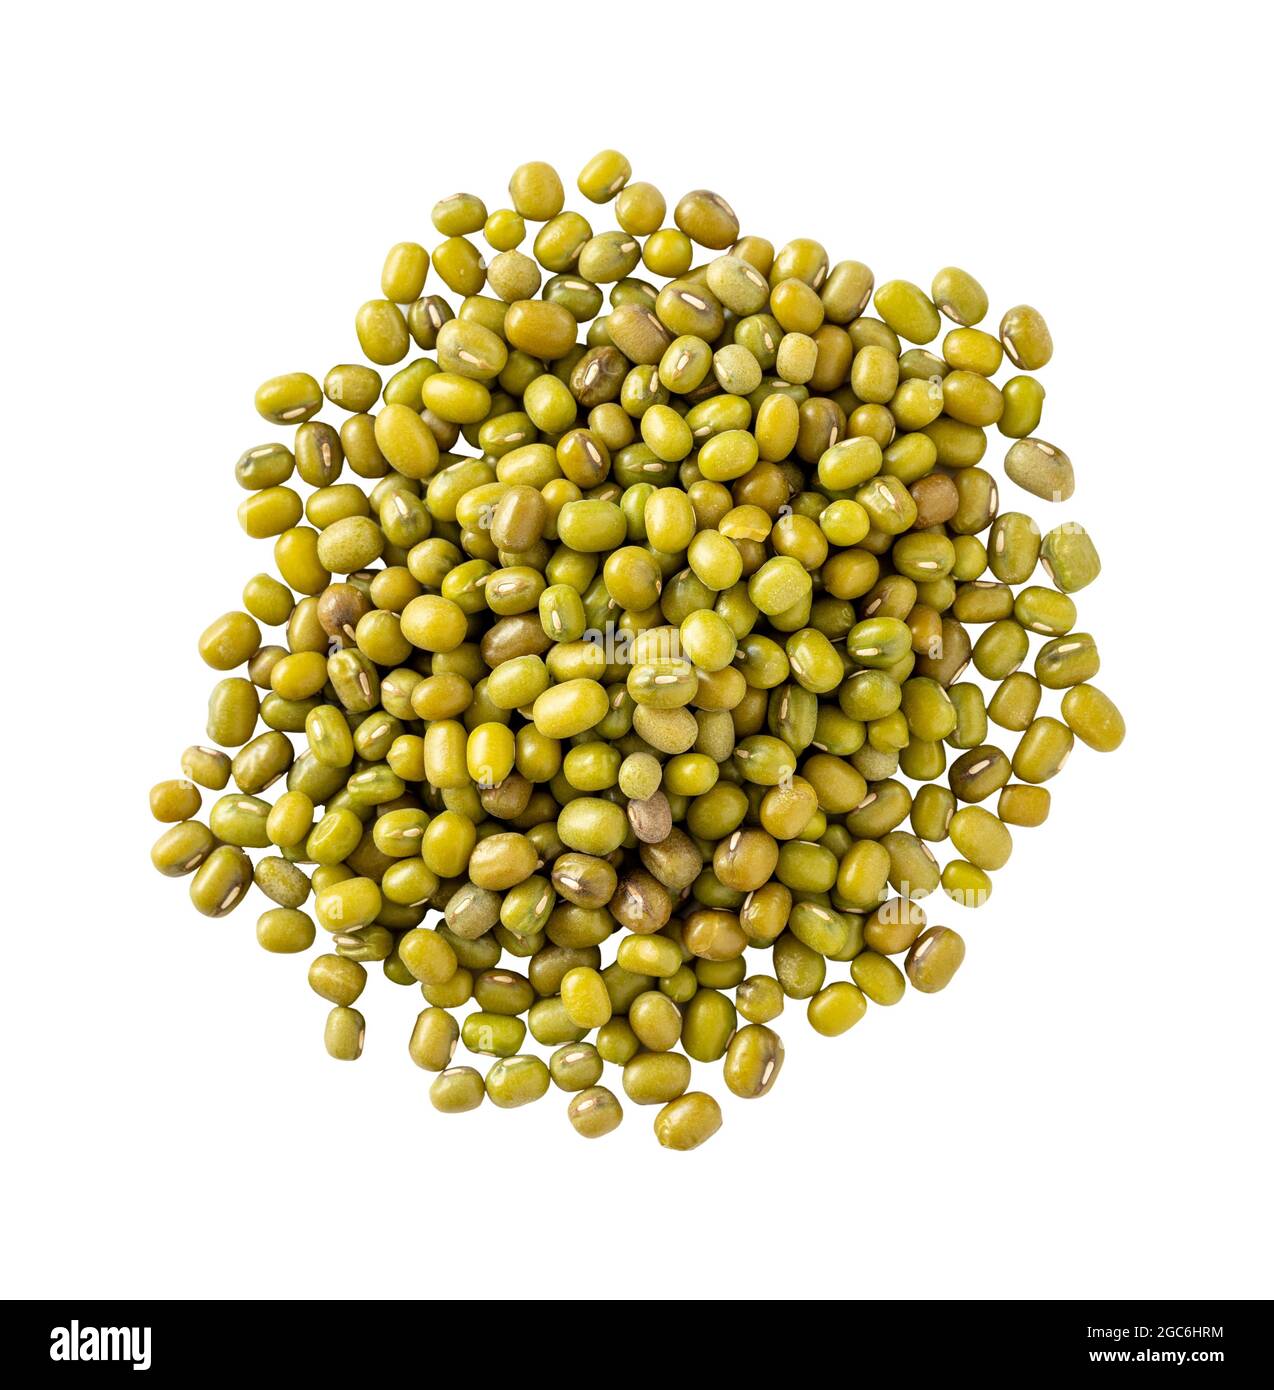 Raw organic mung bean grains on white background. Pile raw mung bean isolated. Top view Stock Photo